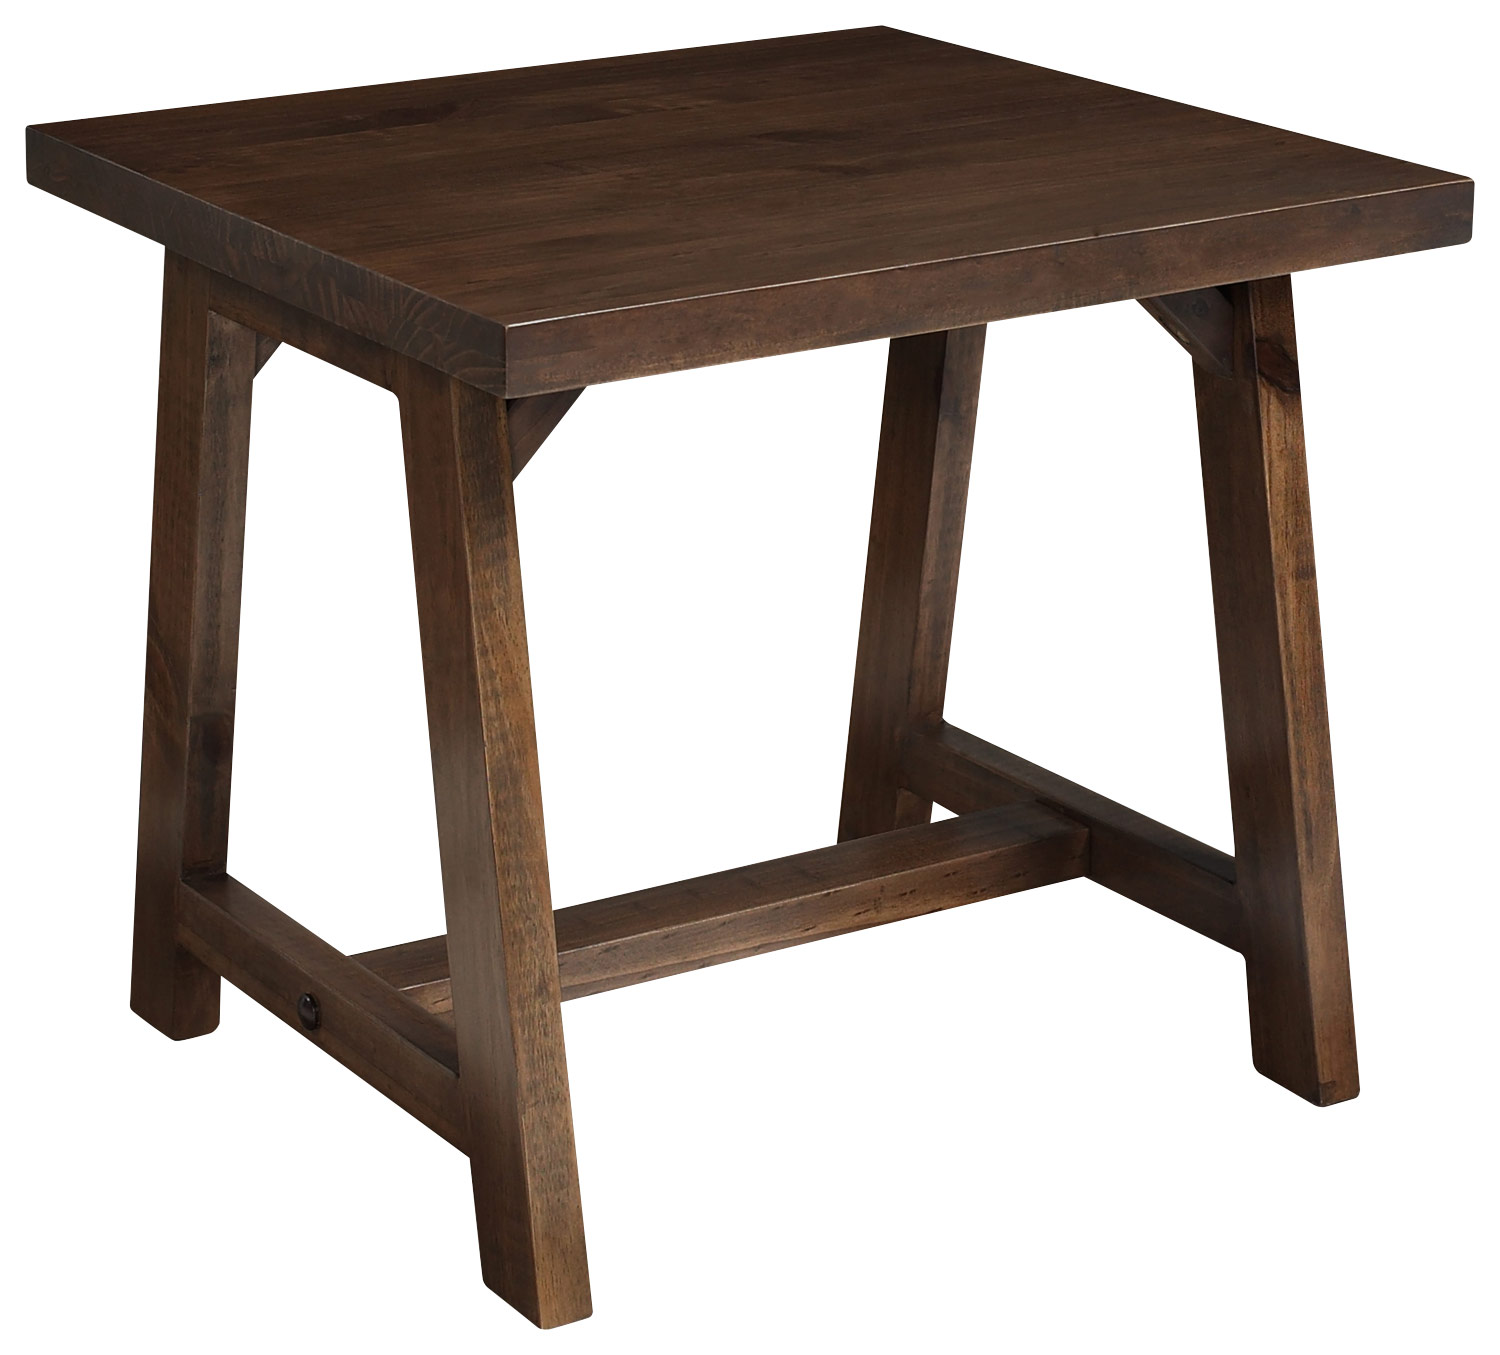 Simpli Home - Sawhorse Square Solid Pine End Table - Medium Saddle-Brown was $105.99 now $84.99 (20.0% off)